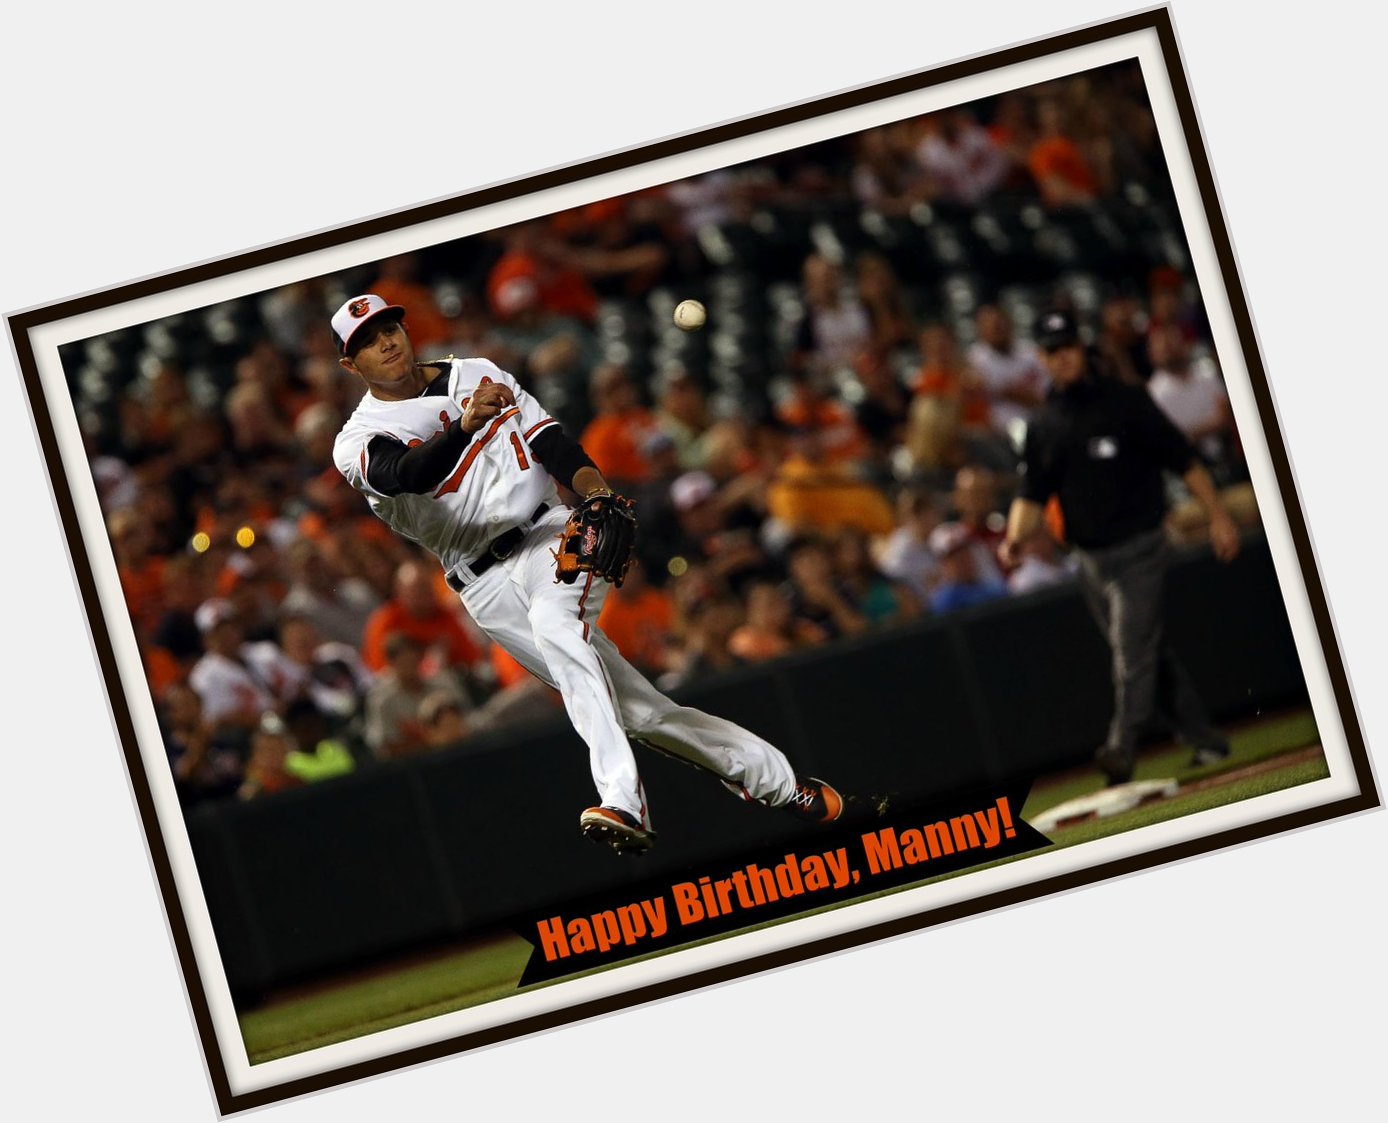 Happy Birthday to Manny Machado! REmessage this to wish him a great day. 